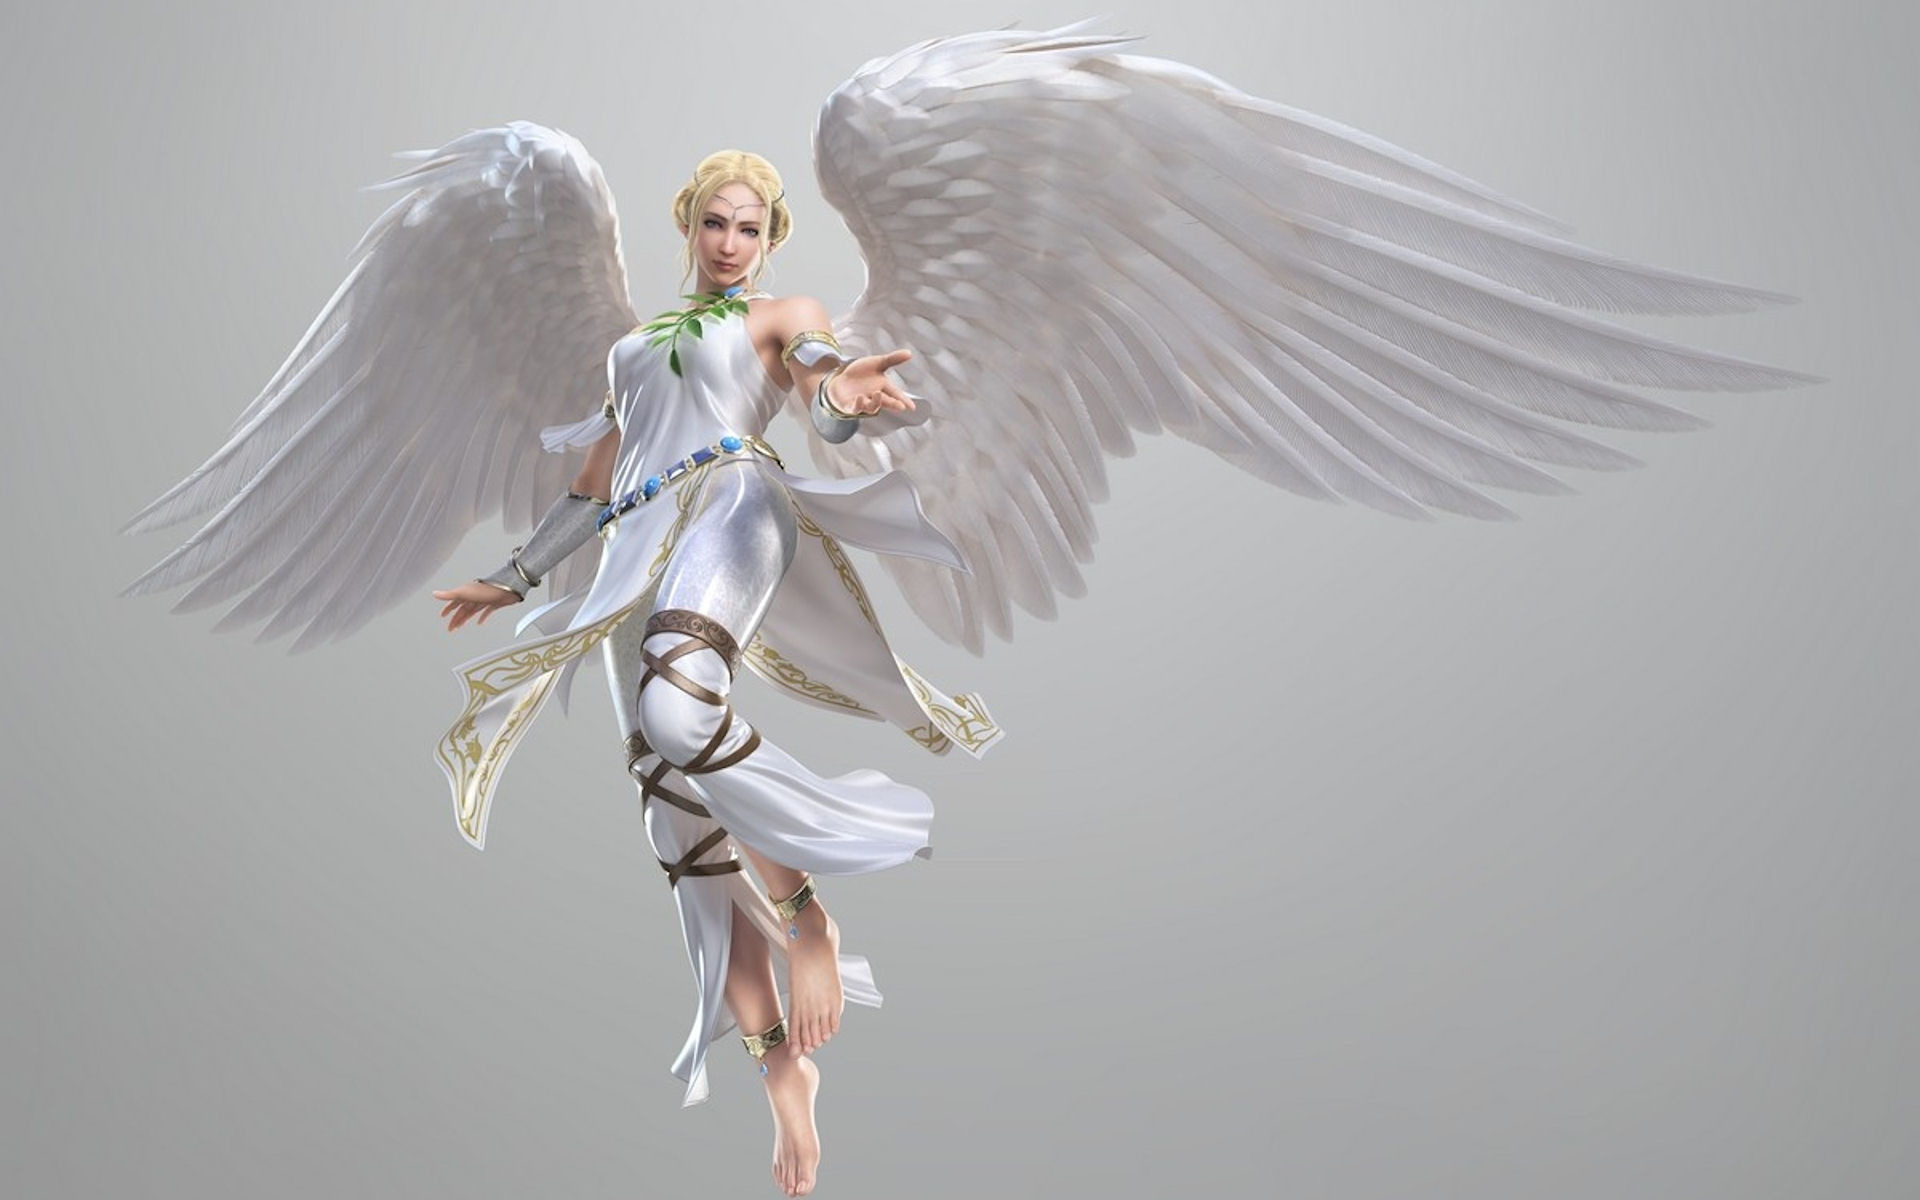 1920x1200 Explore Angel Wallpaper, Wallpaper For, and more!